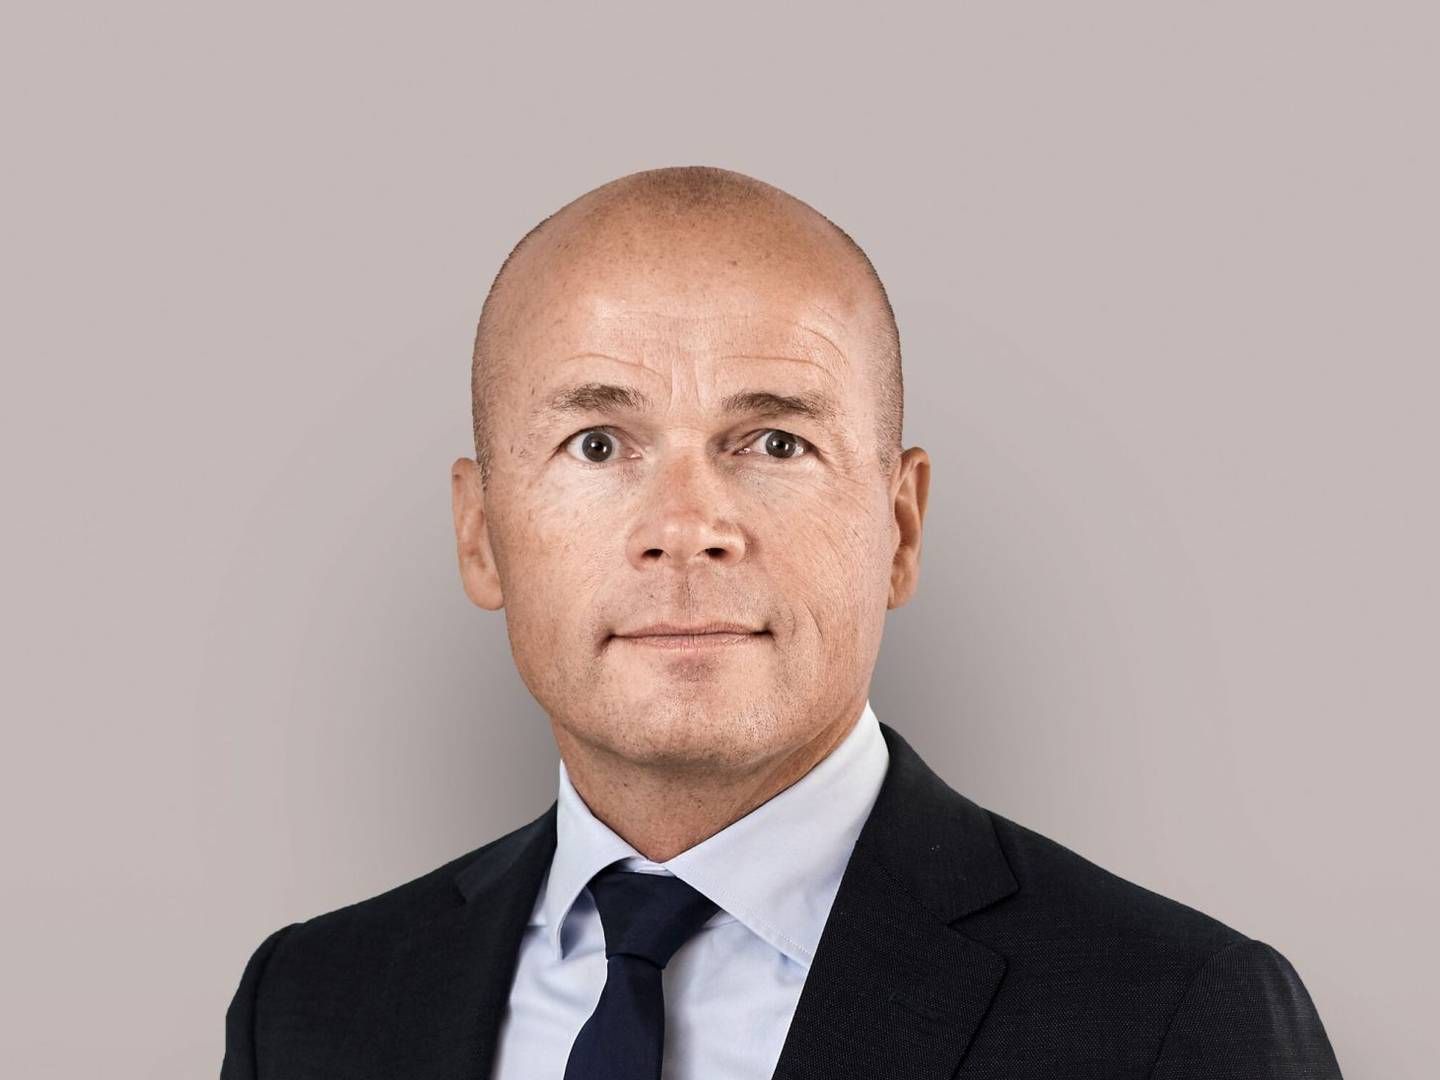 Stig Pastwa has a background as CFO of Maersk's Ivory Coast branch in West Africa. | Photo: Navigare Capital Partners